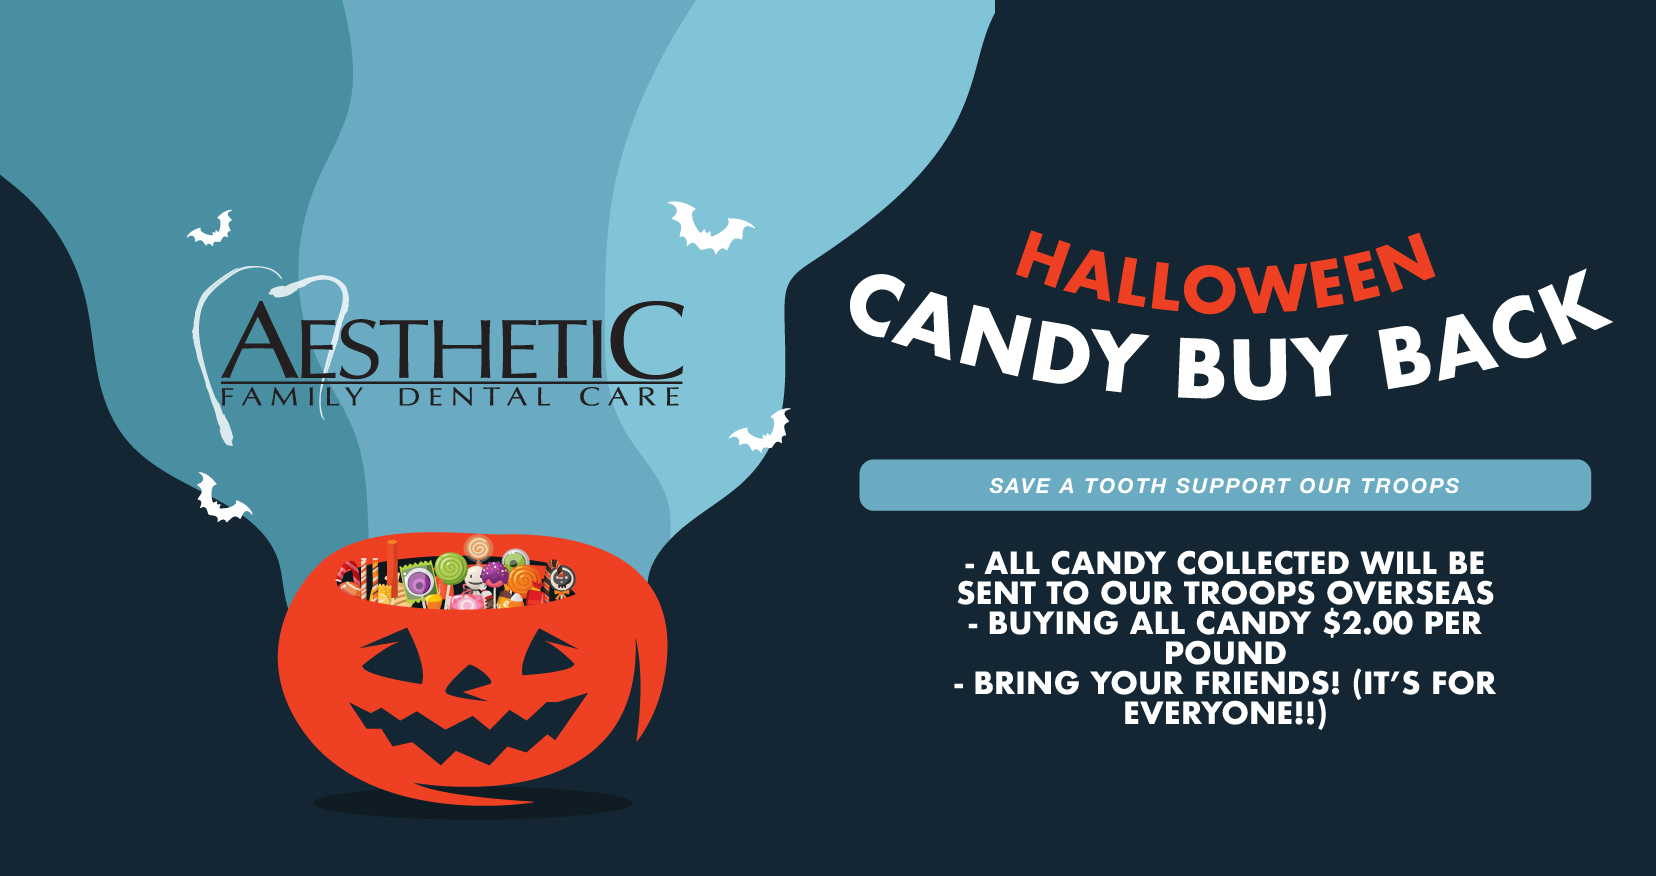 The Halloween Candy Buy Back Event 2019